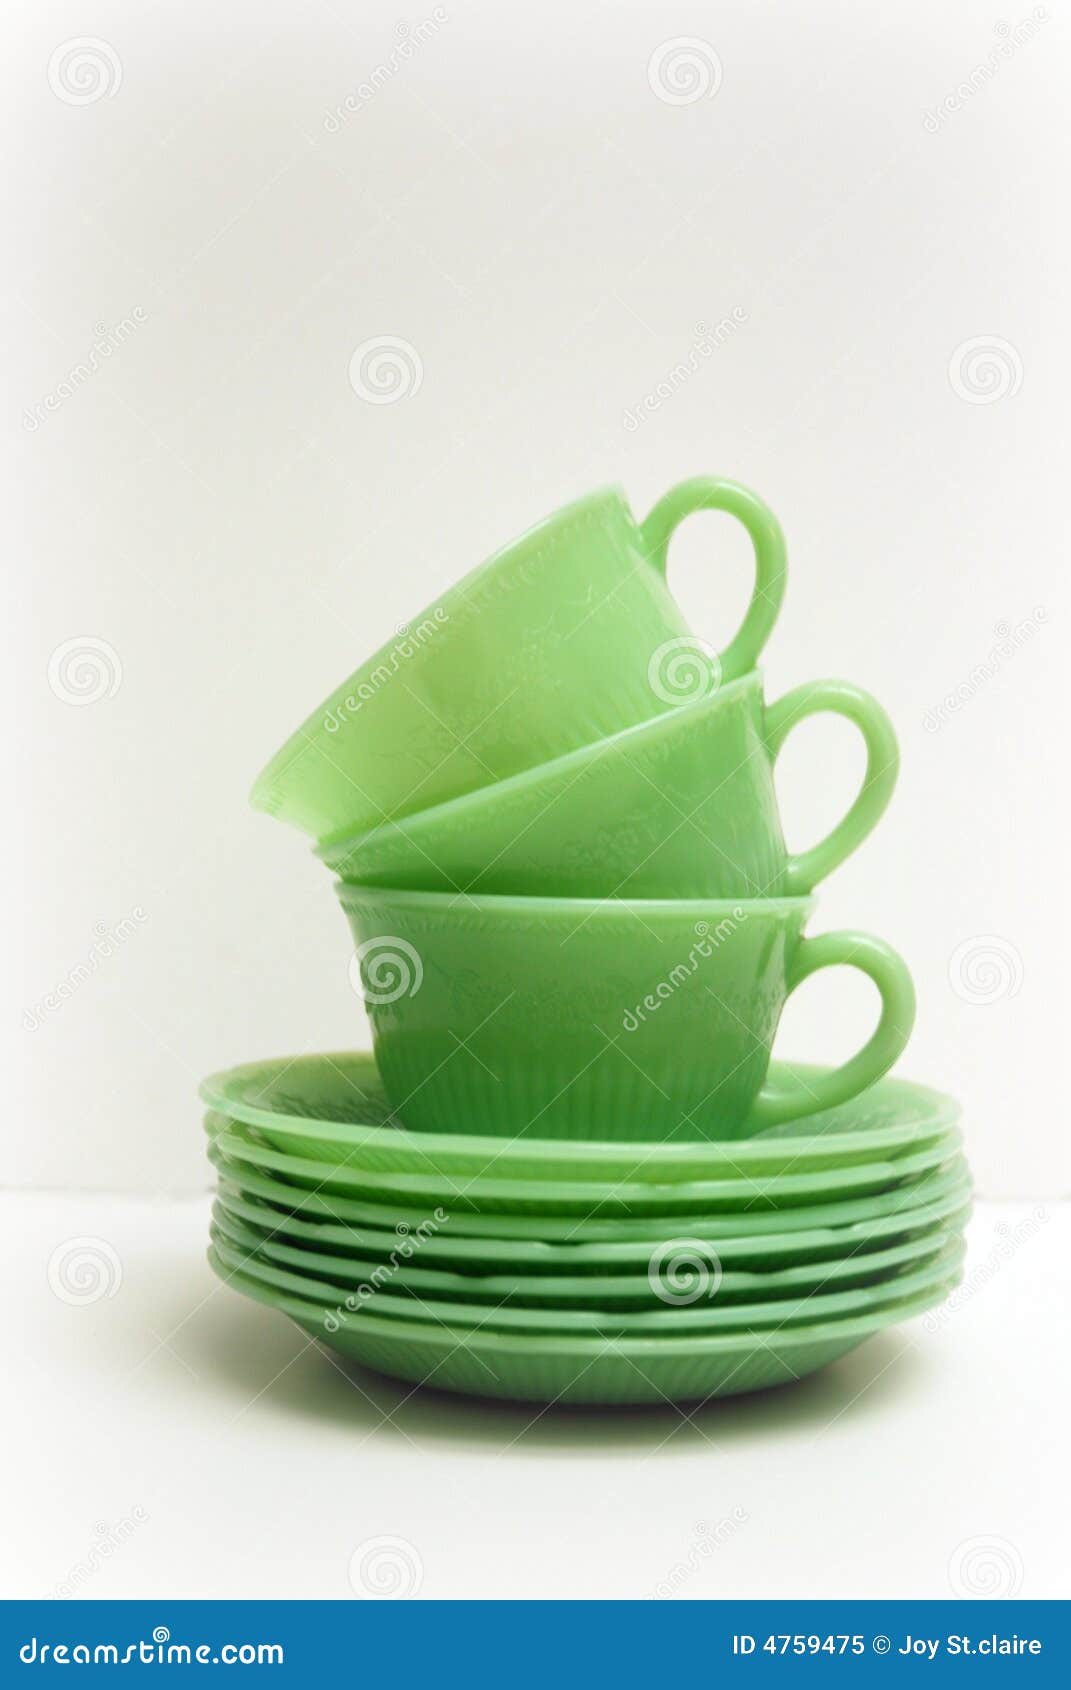 cups & saucers